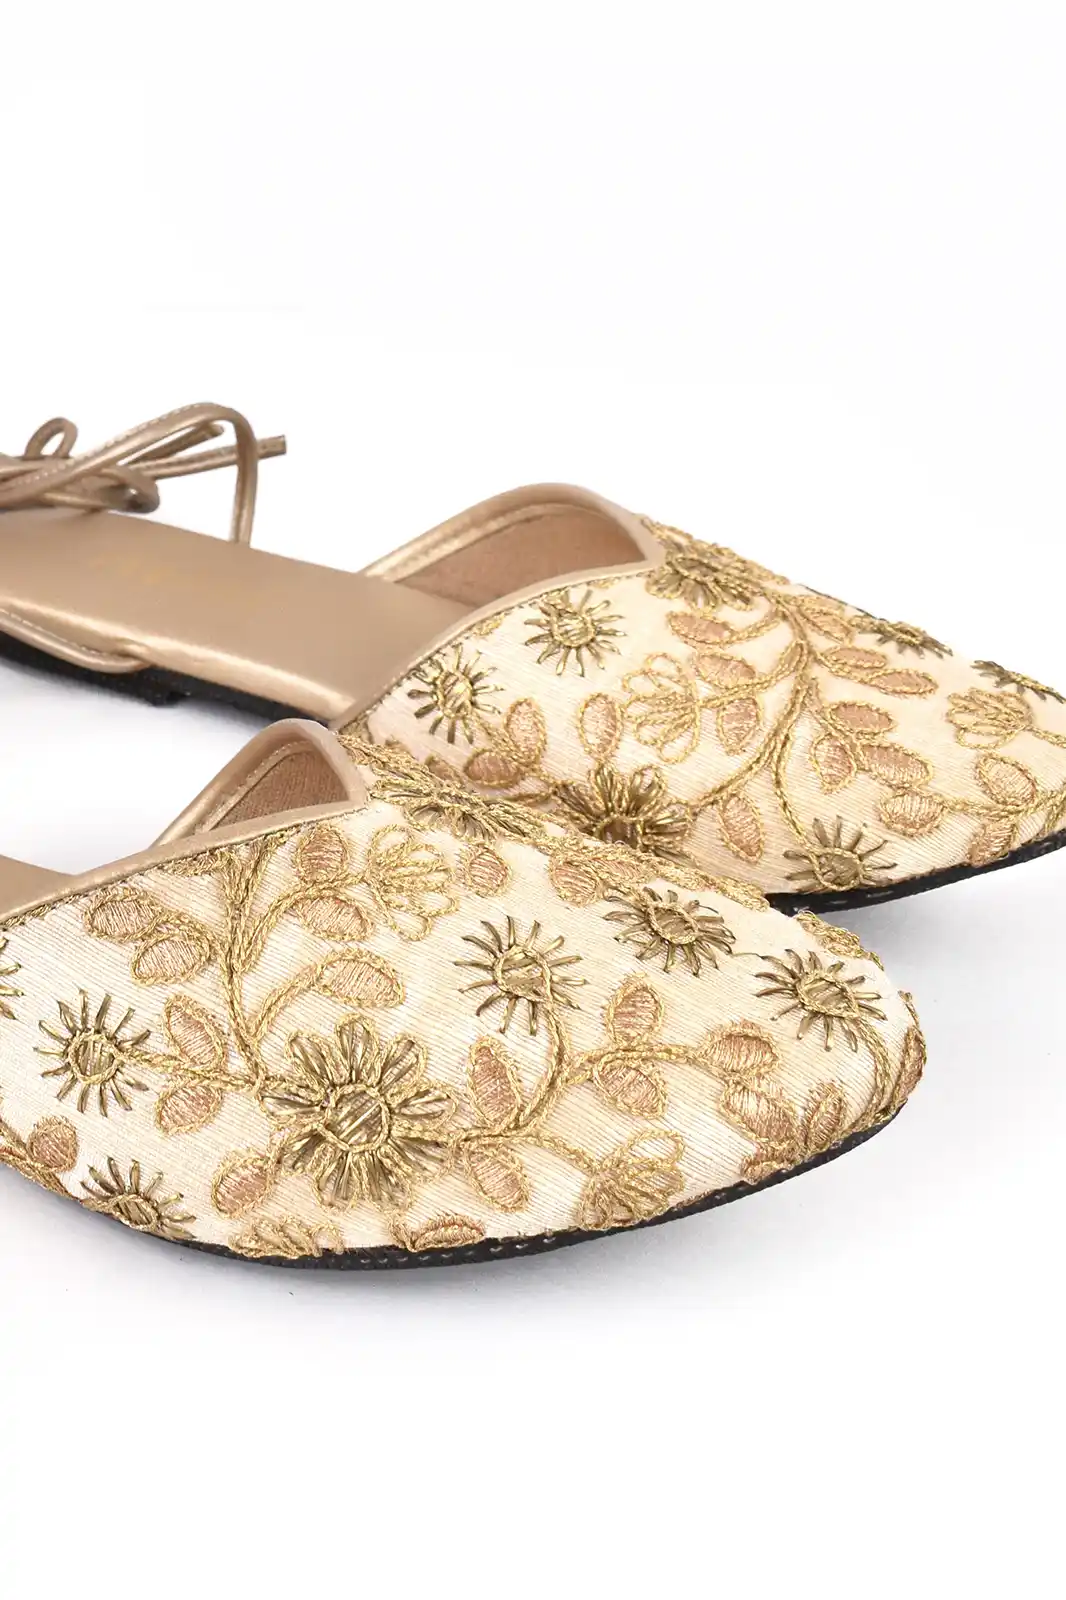 Paaduks Saba Gold Mules Embroidered, womens heels footwears, womens heels sandals, women's heels sandals, high heels sandals, women's heels footwear, flipkart women's footwear heels, high heels wedding sandals, womens sandals heels, women's heel sandals, women's shoe brands, womens sandals crocs, women's shoes online, women's footwear flats, white womens sandals, womens shoes amazon, womens sandals comfort, womens sandals flipkart, women's trending shoes, women's sandals brands, womens footwear online, organic footwear, vegan footwear india, vegan shoes in india, vegan shoes india, best brand for women's sandals in india, best women's sandals brands, eco friendly footwear brands in india, vegan shoes brands in india